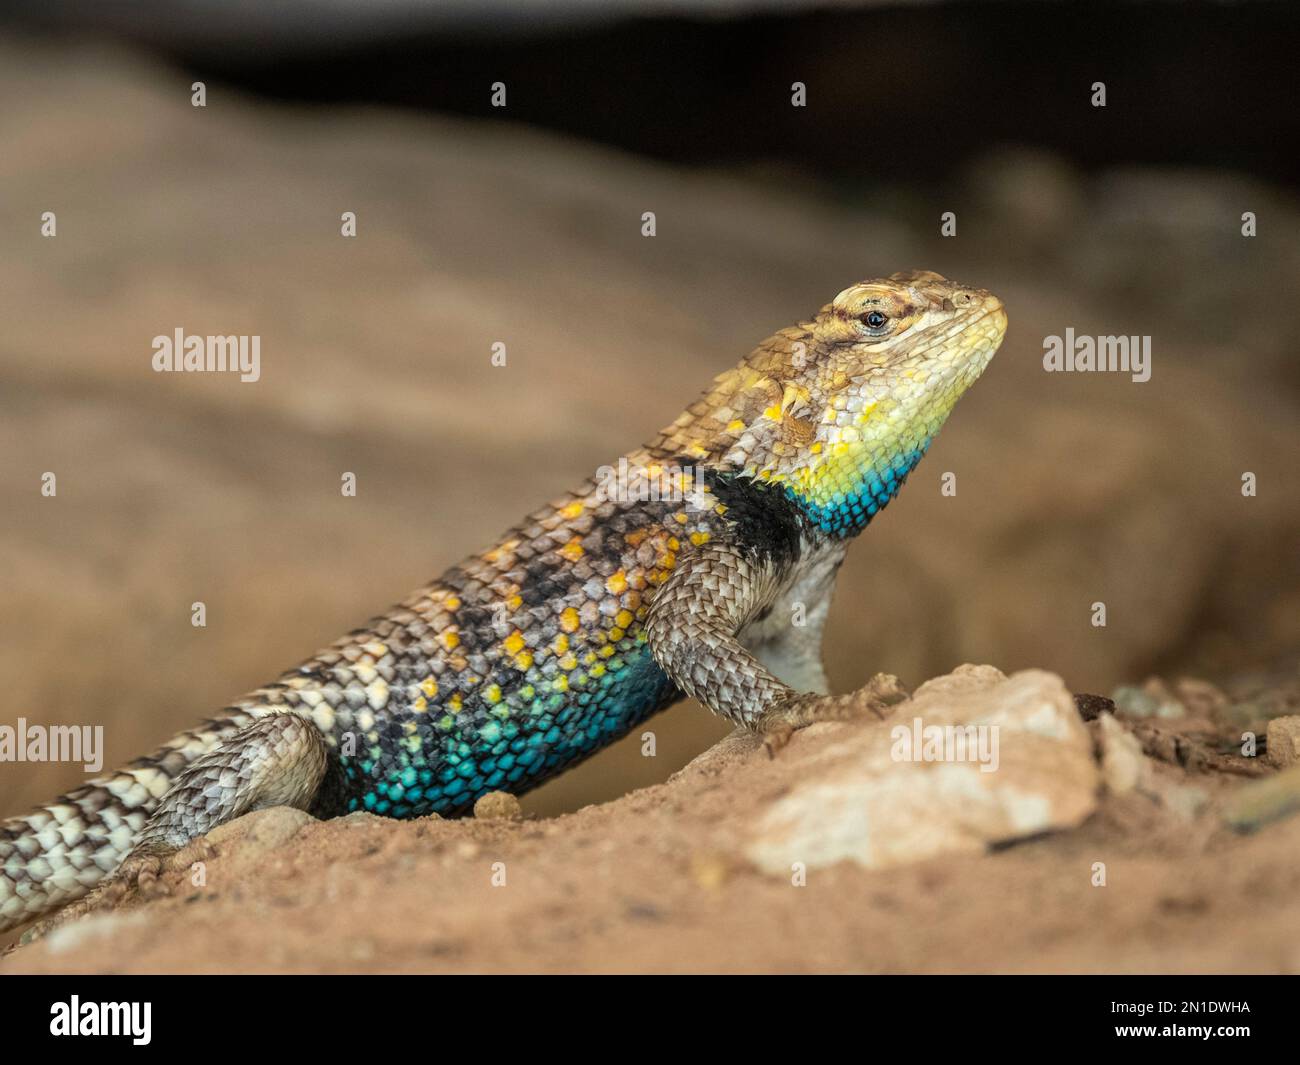 An adult male desert spiny lizard (Sceloporus magister), under a ledge in Grand Canyon National Park, Arizona, United States of America, North America Stock Photo